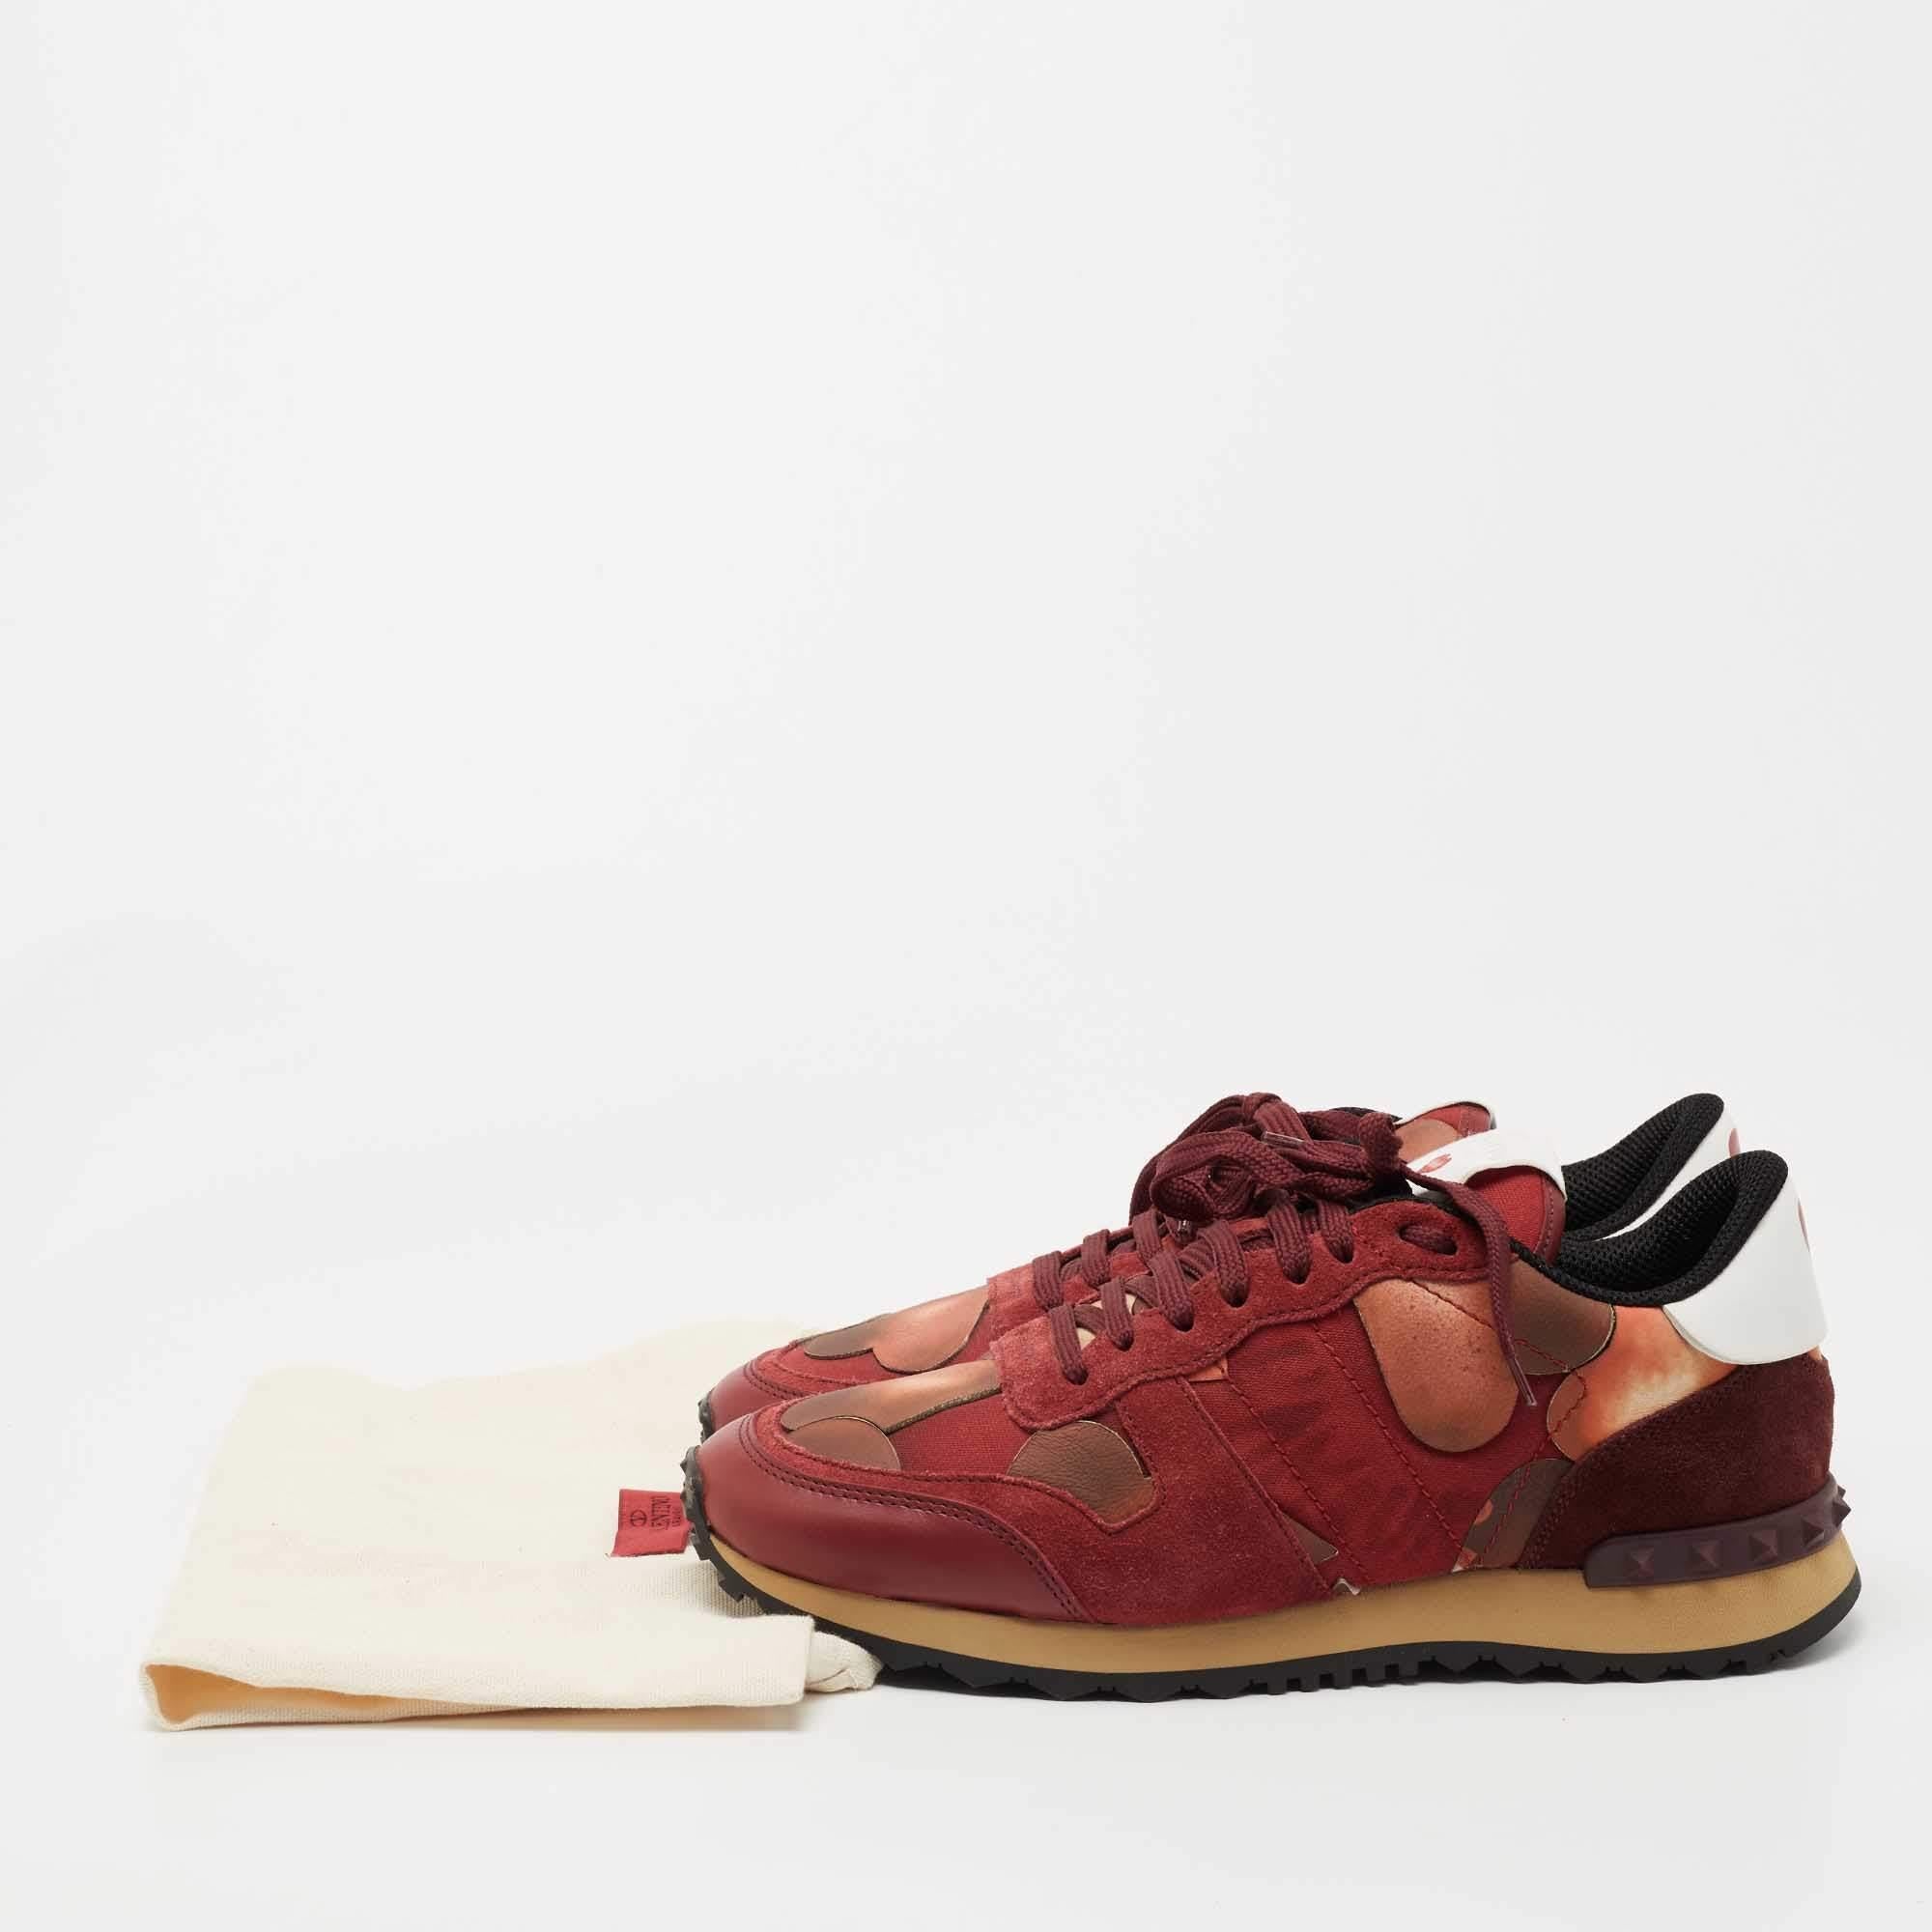 Valentino Red Canvas, Leather and Suede Rockrunner L'Amour Sneakers Size 40.5 5